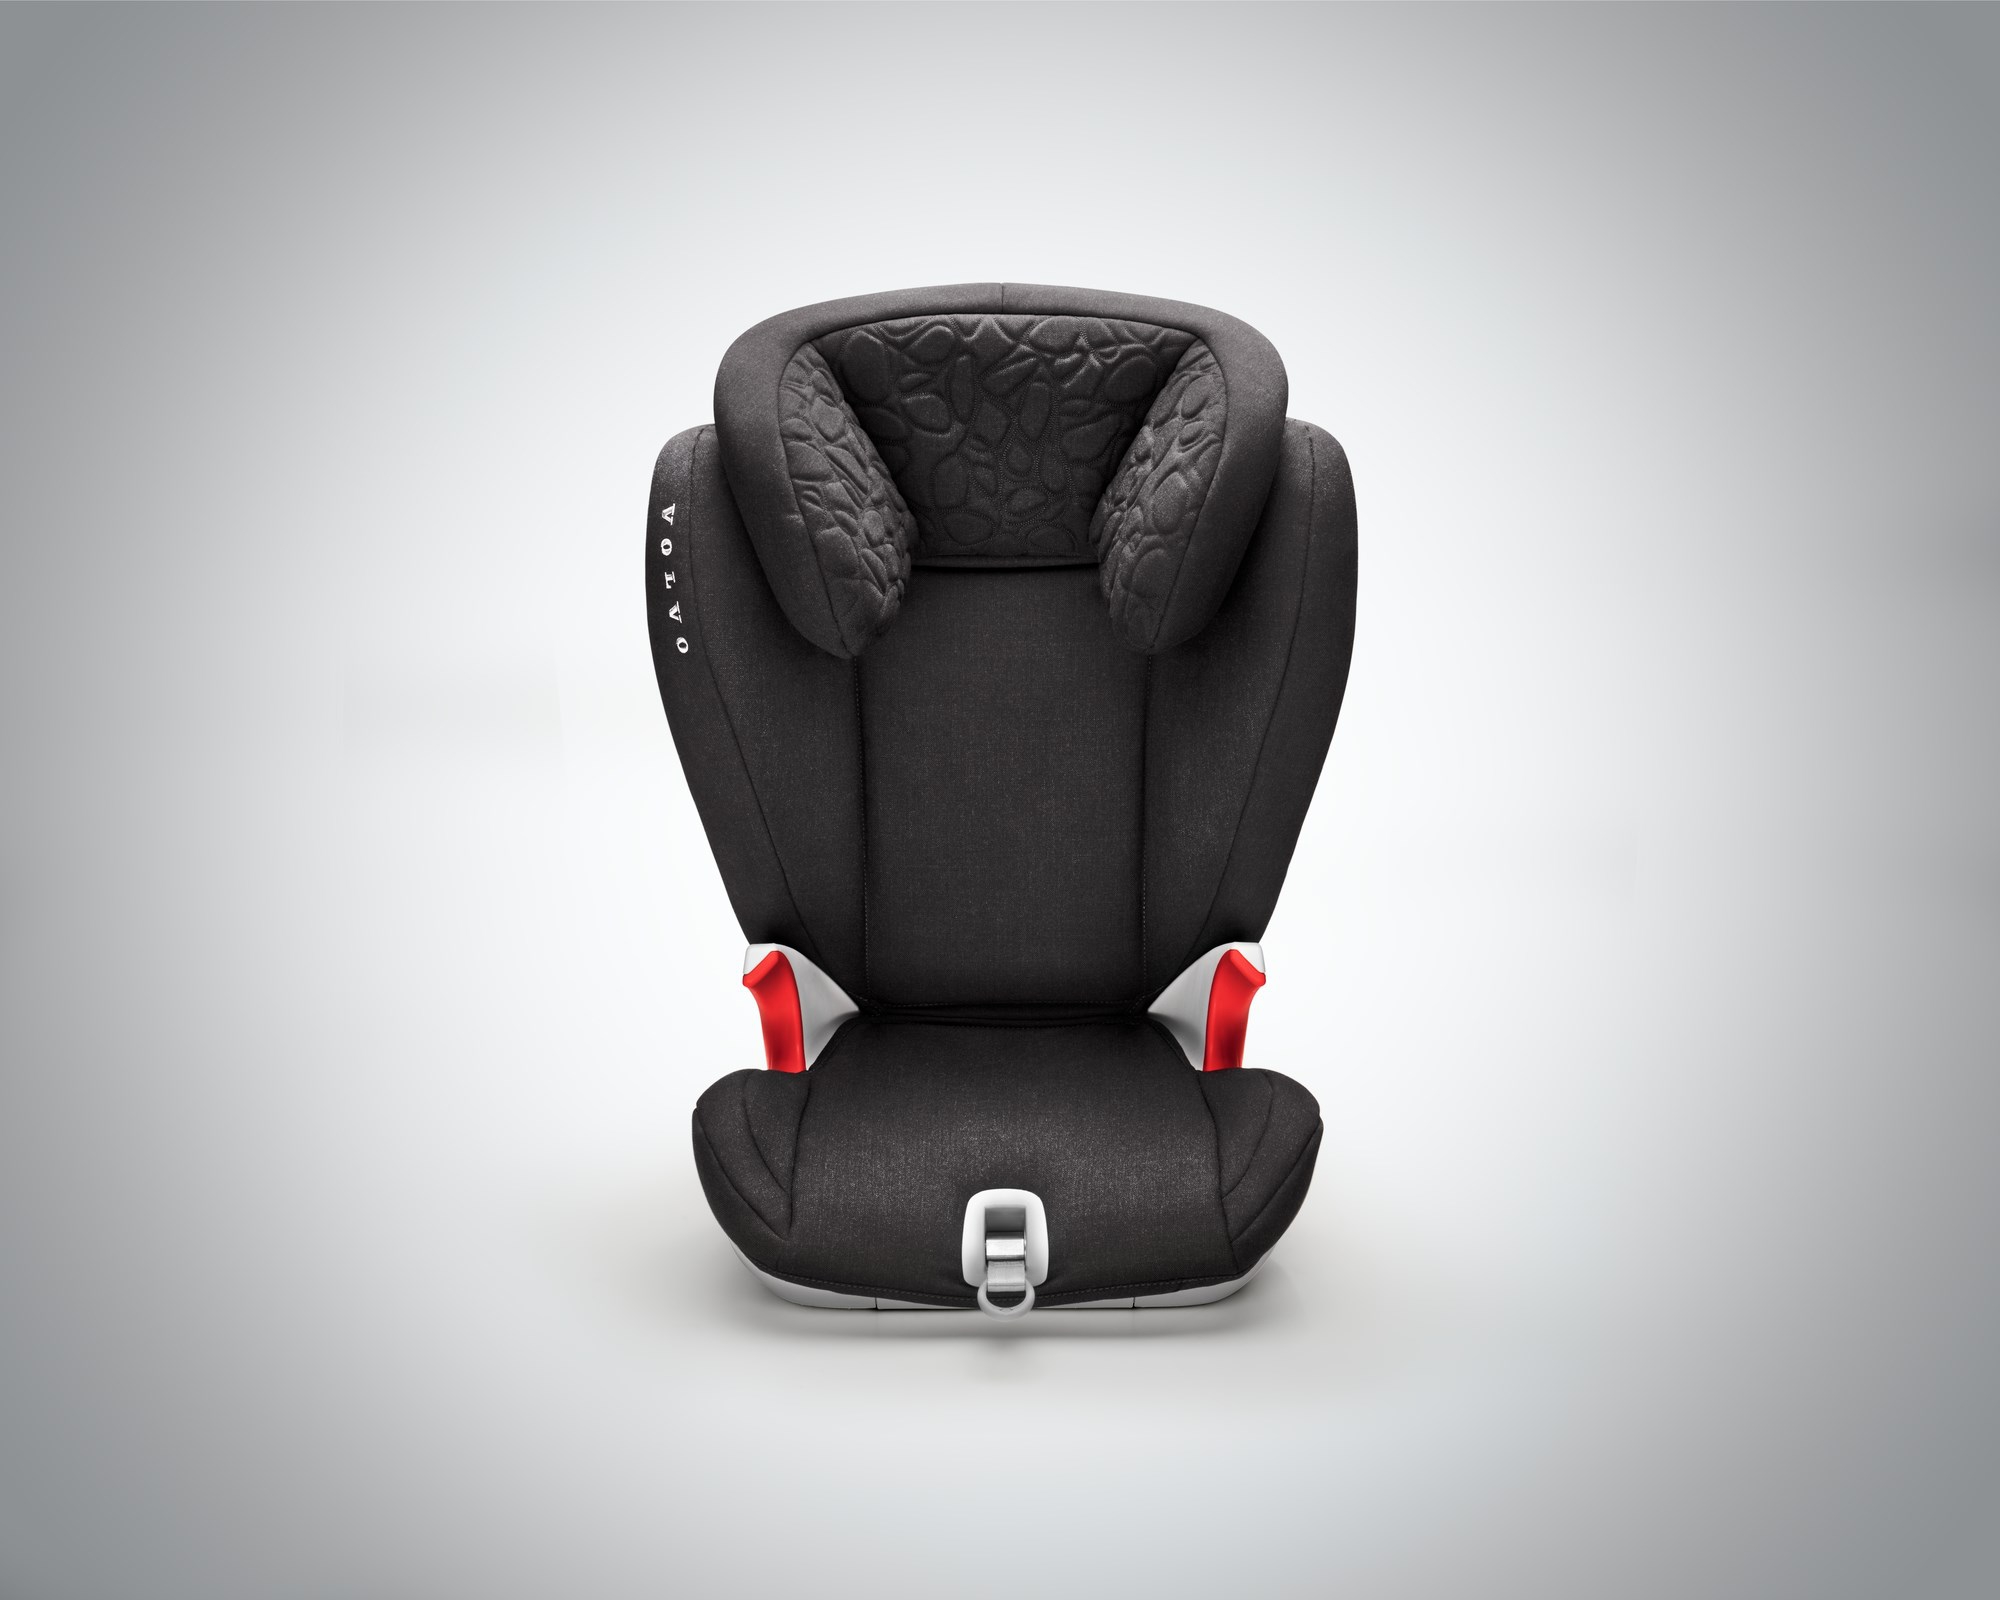 Safety Innovations: Cutting-Edge Features in the Latest Car Seat Models